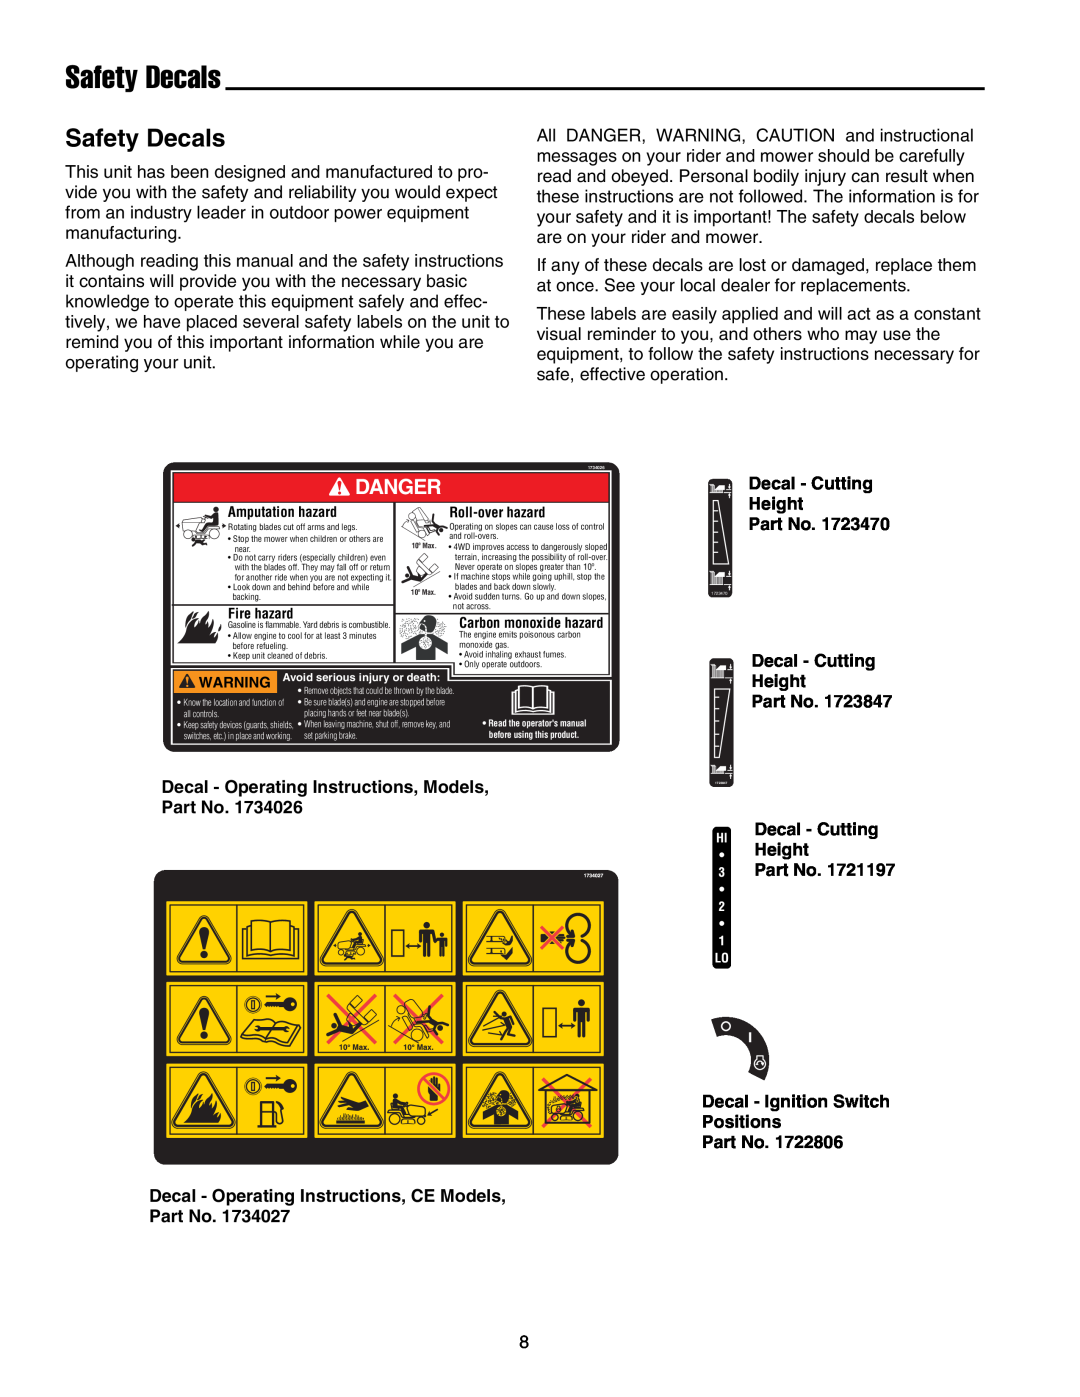 Snapper 1700, 2700, 400 manual Safety Decals, Danger, Decal - Operating Instructions, Models, Decal - Cutting Height 